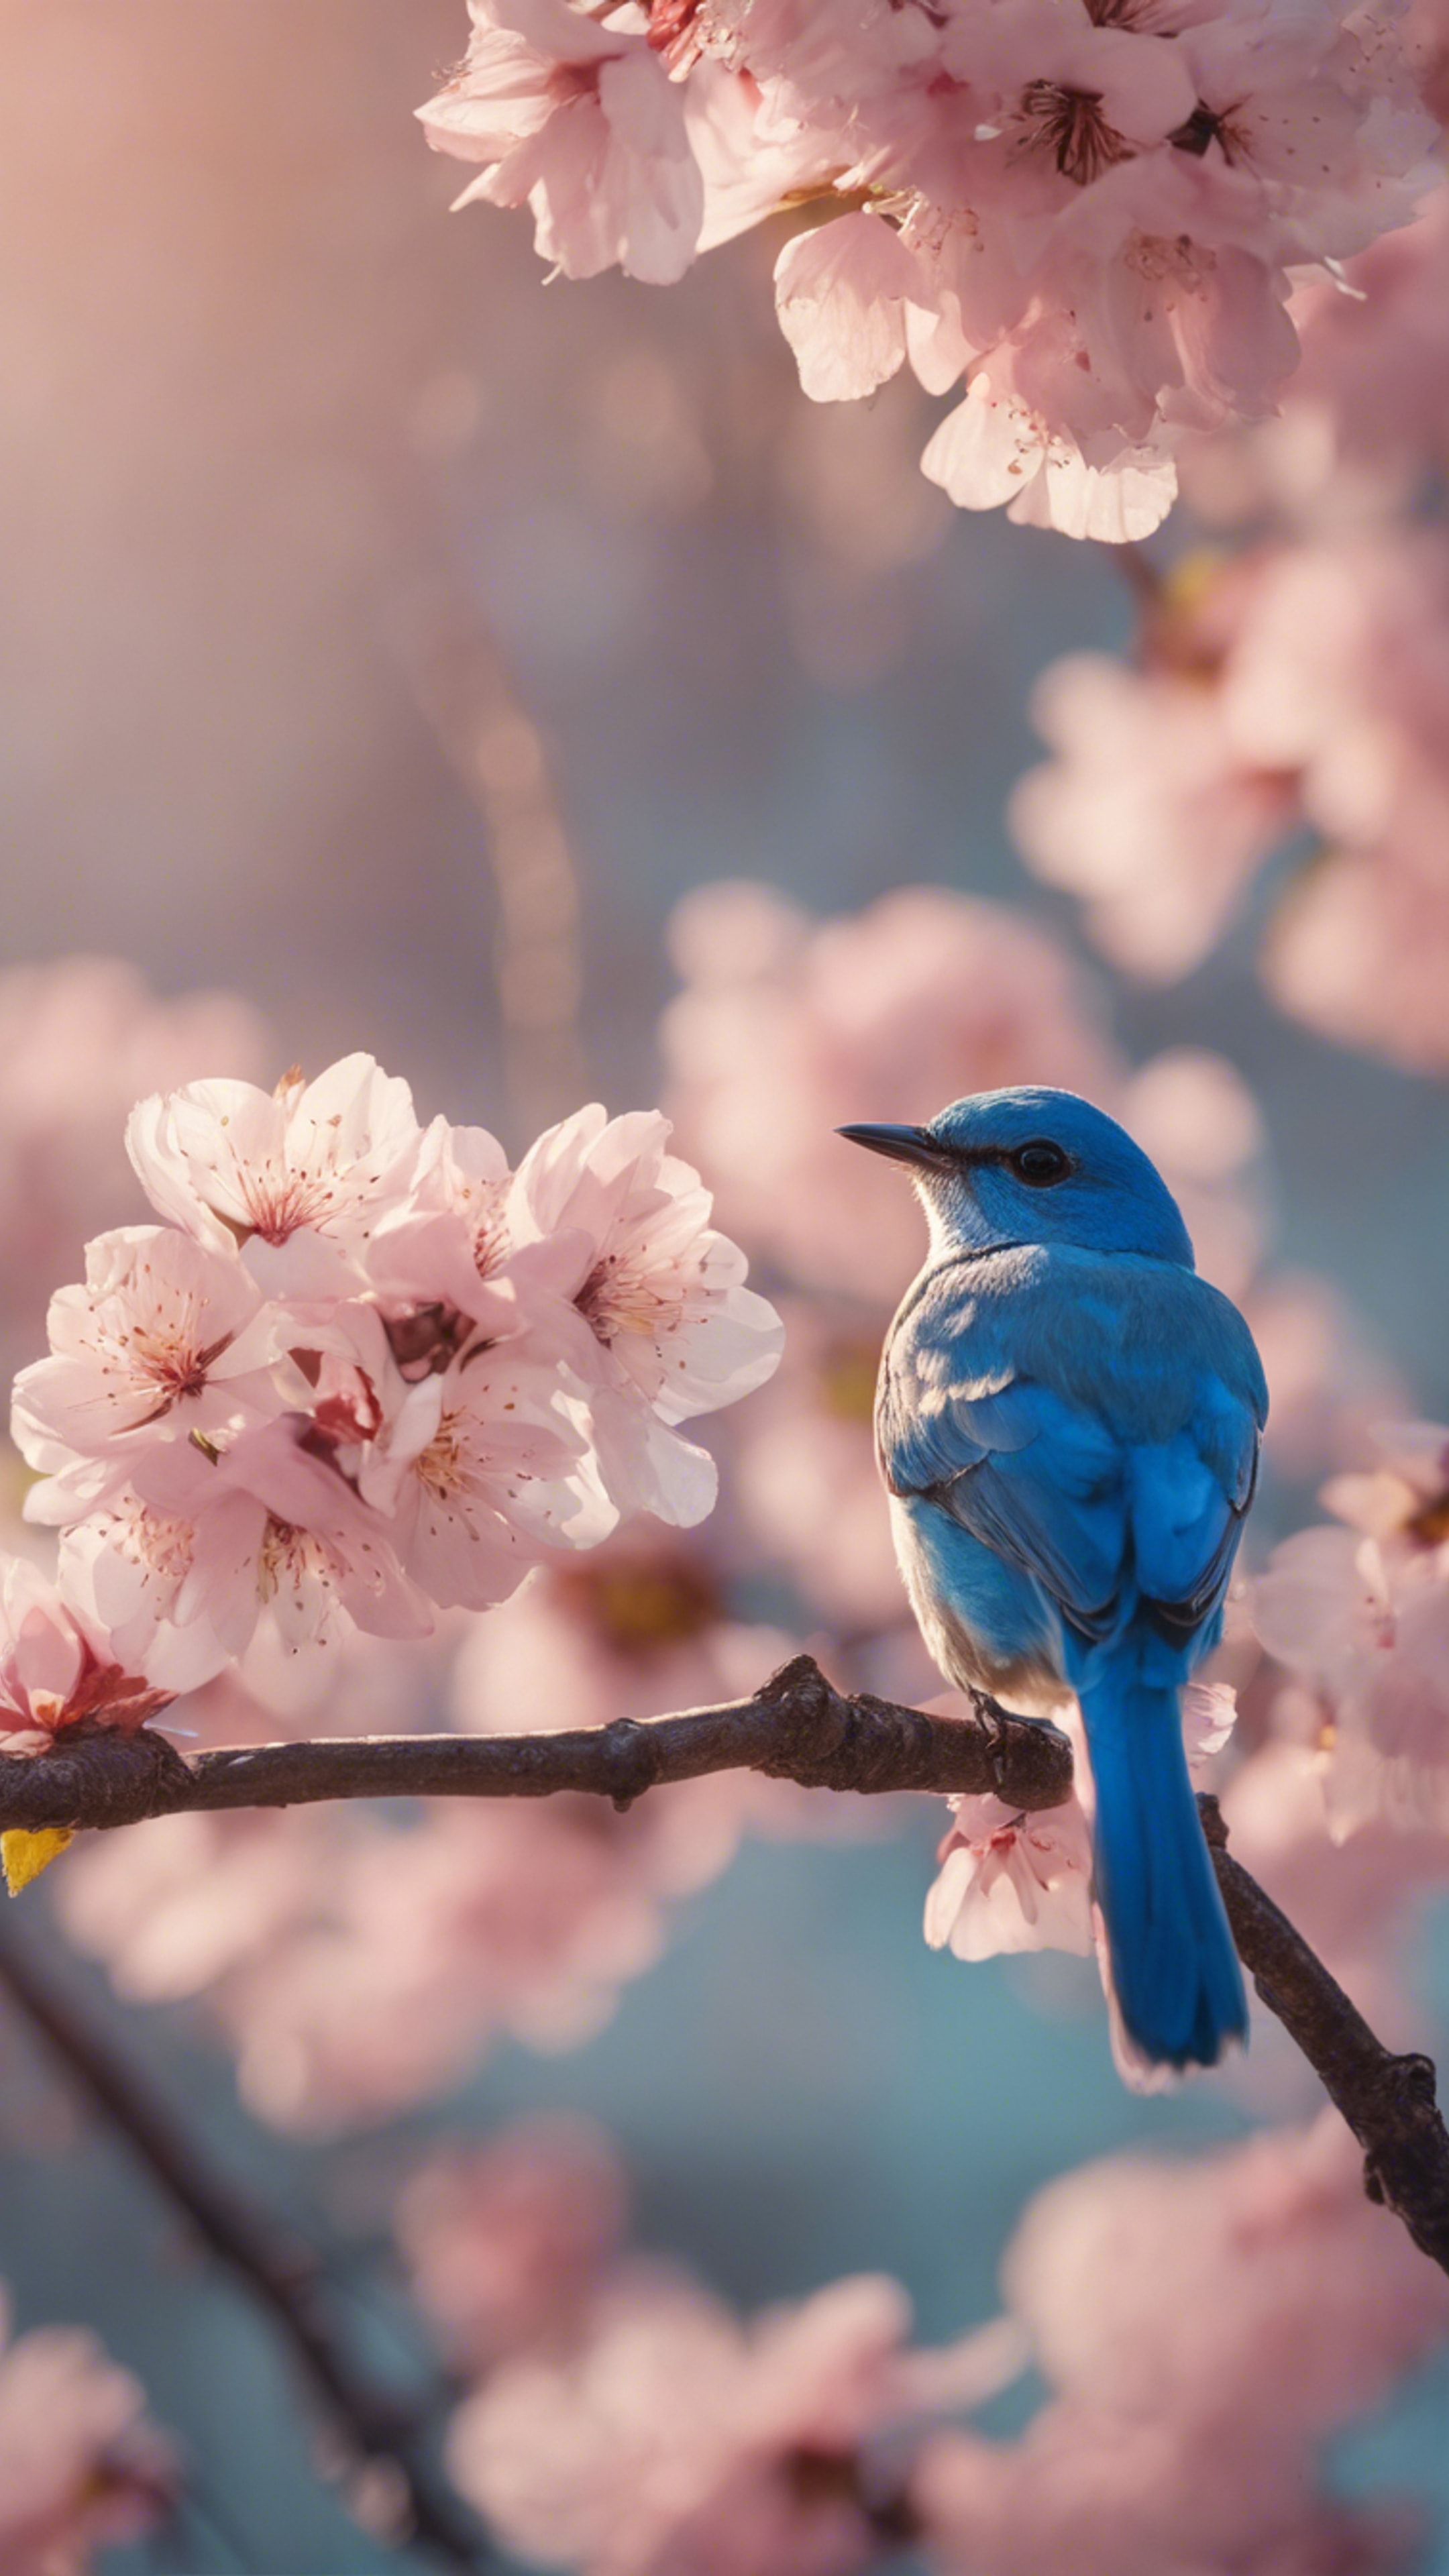 A beautiful blue bird gently perched on a blooming cherry blossom branch during sunset壁紙[3078c602aa834d90bab2]